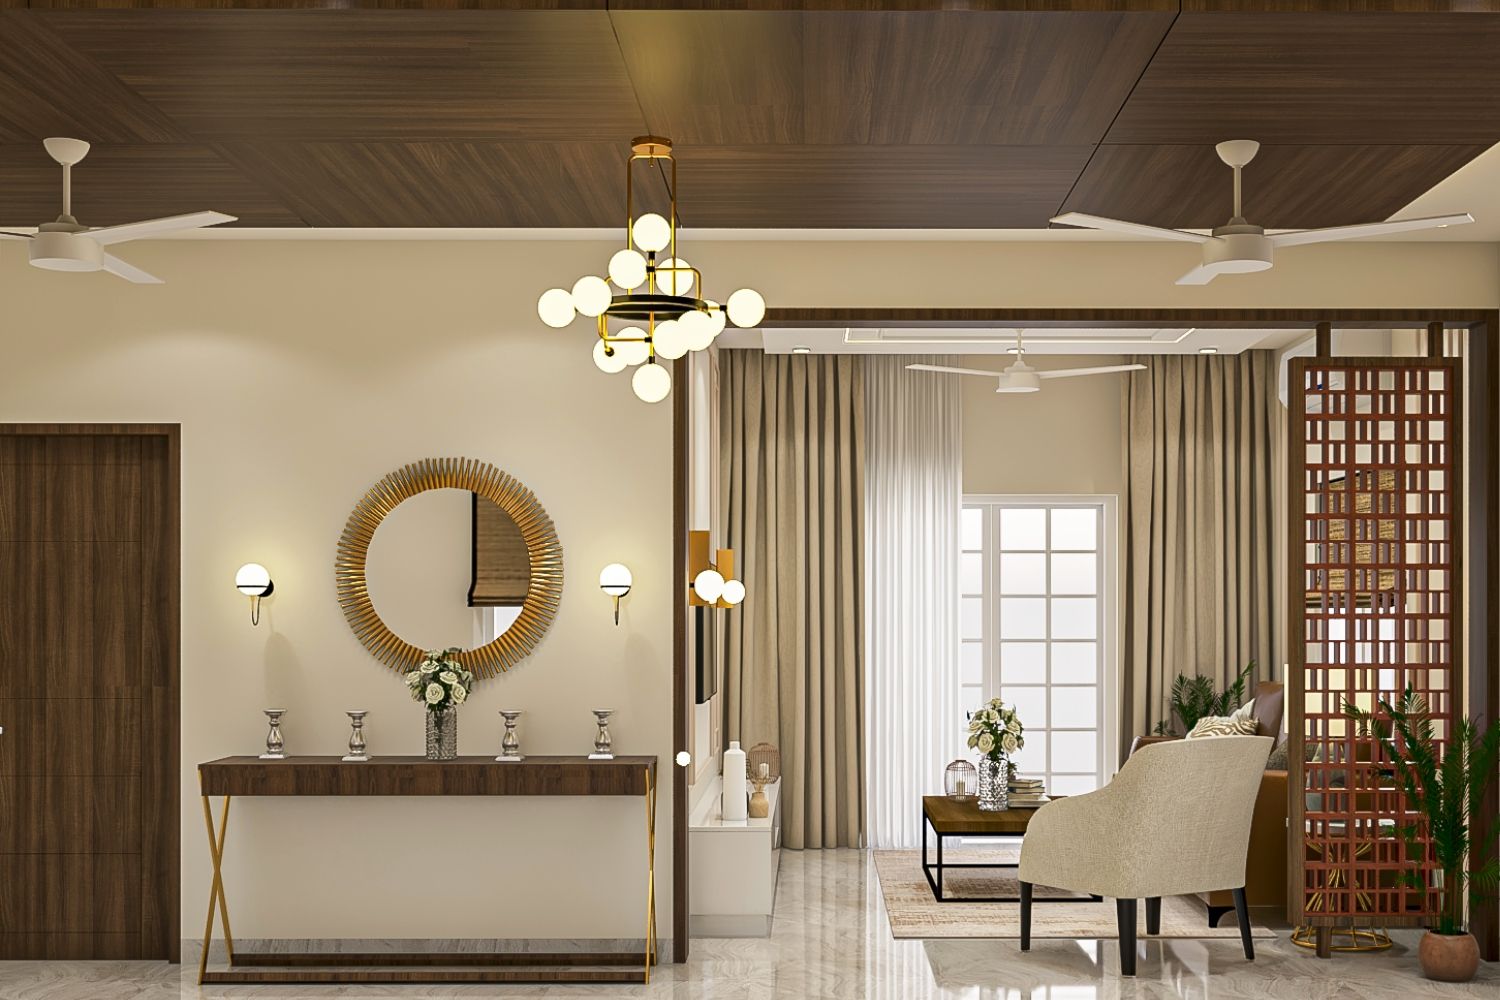 Single-Layered Wooden Ceiling Design With Square Panels And Chandelier